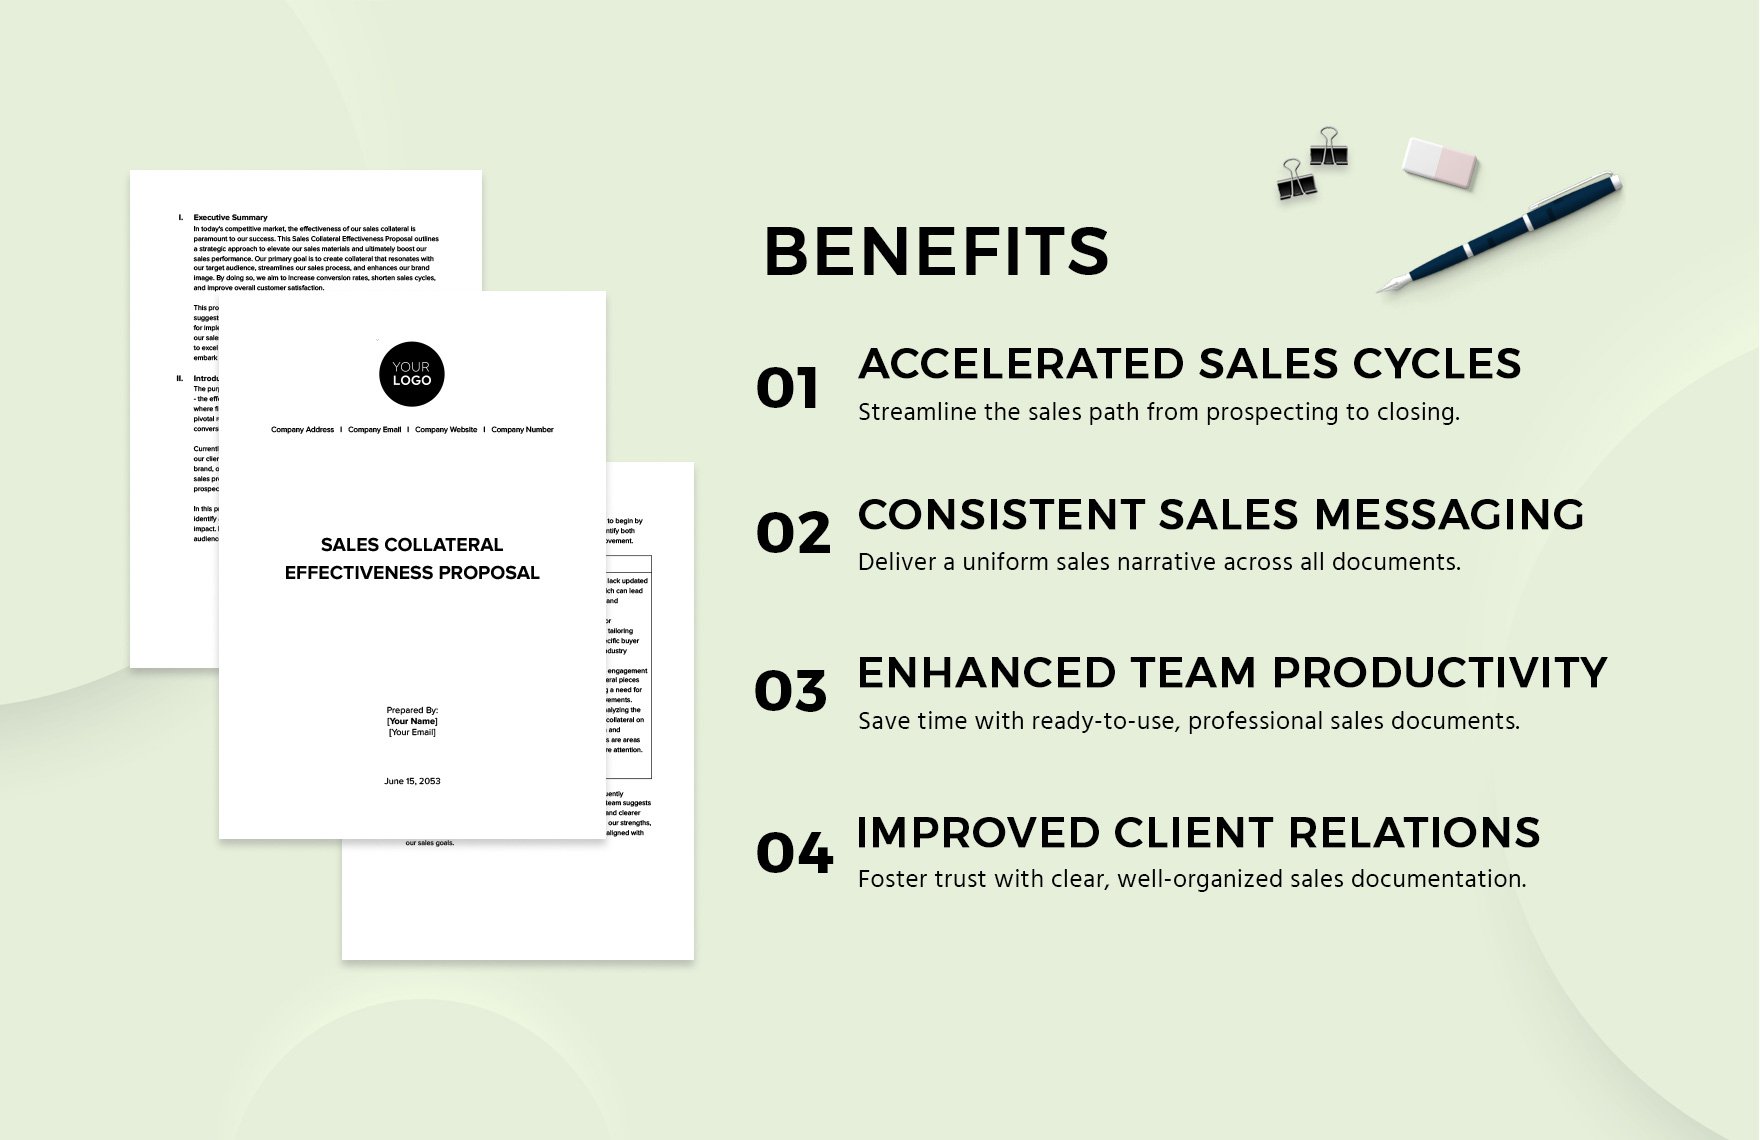 Sales Collateral Effectiveness Proposal Template